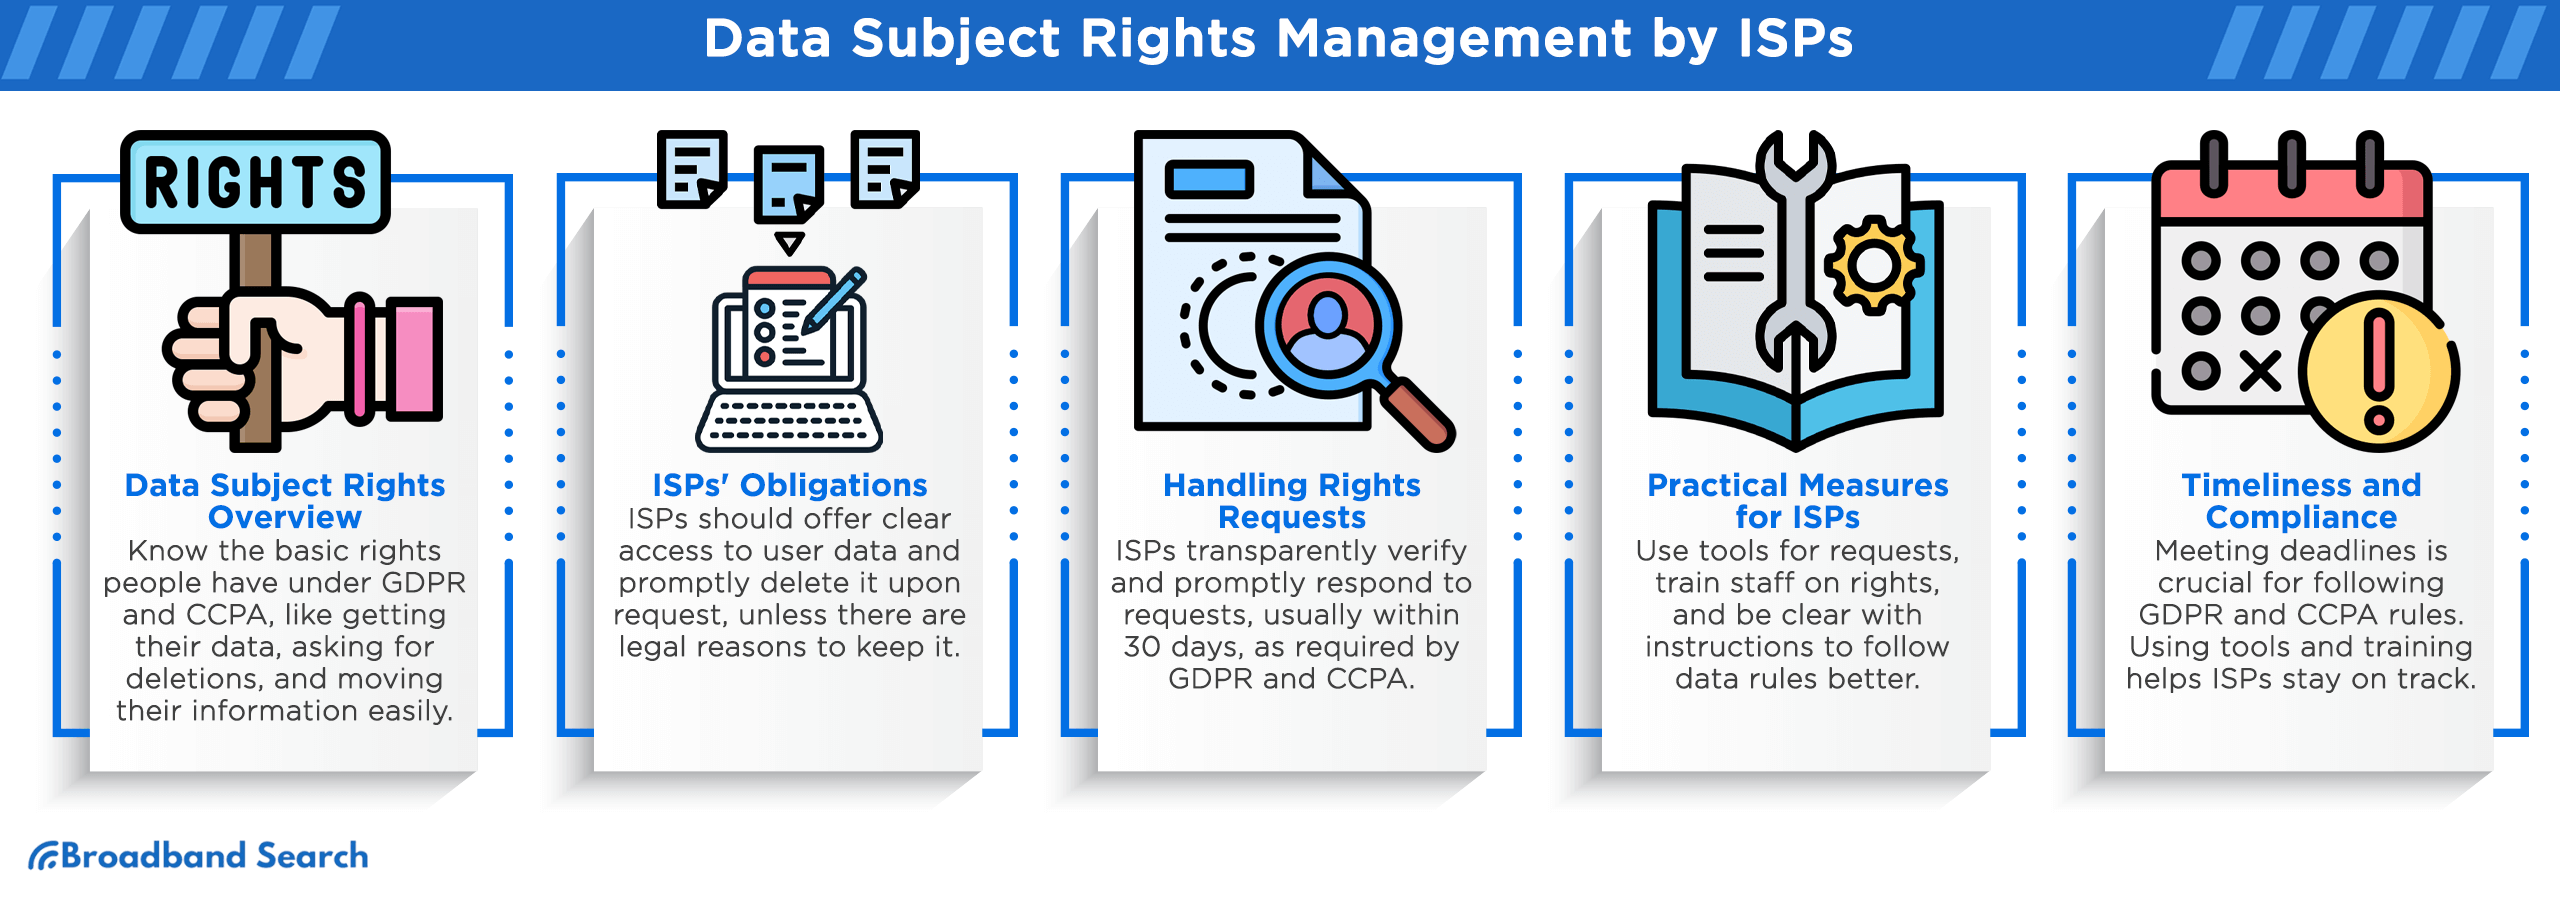 Data subject rights management by ISPs